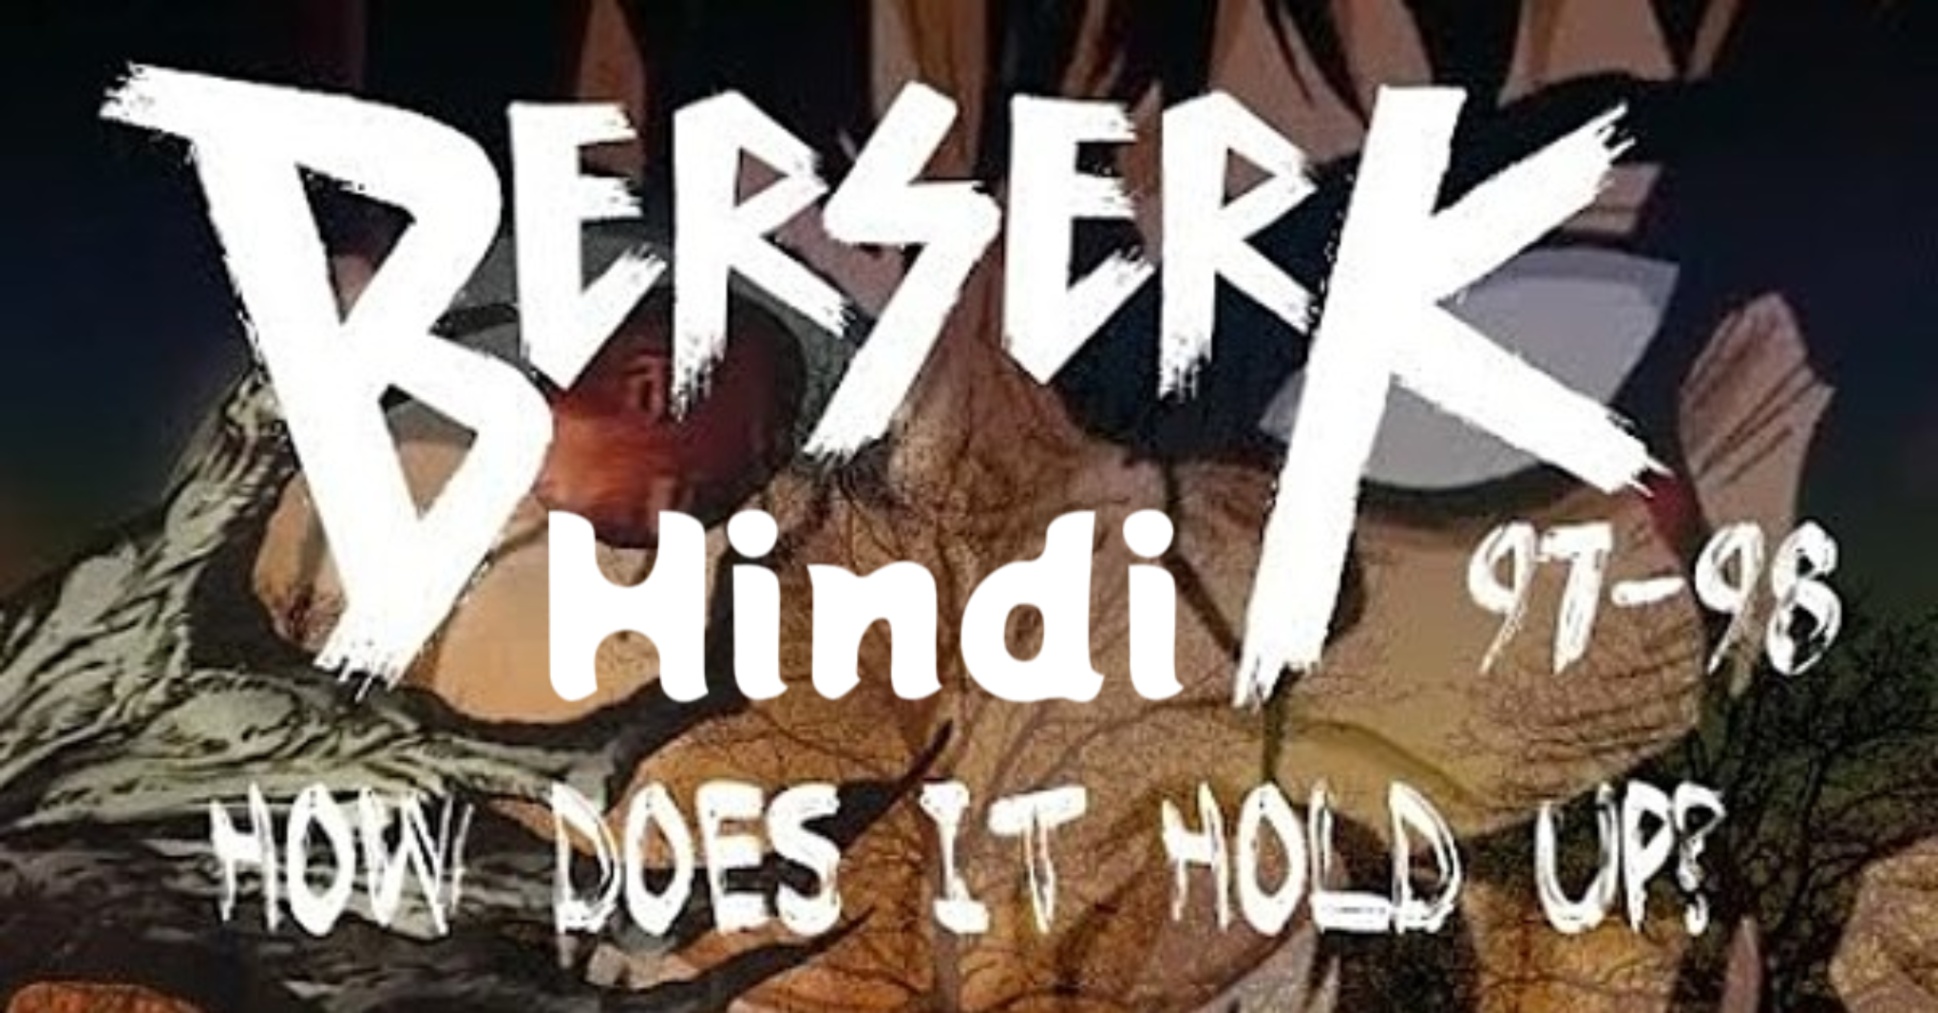 Watch monster and Berserk anime in hindi dubbed 